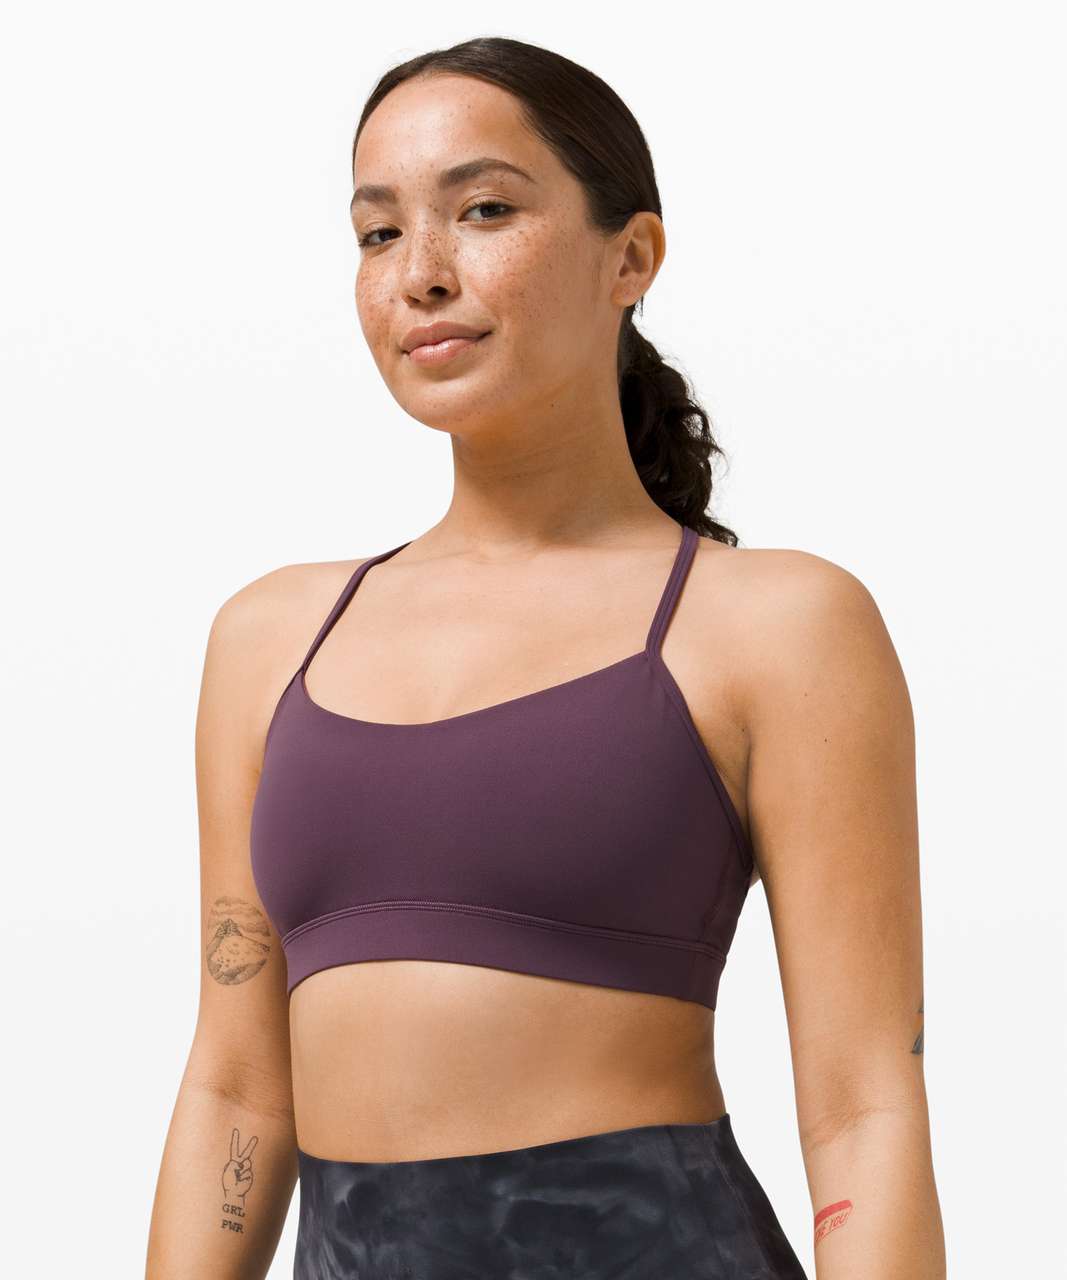 Zella dupe for the Sweet Awakenings Bra. Larger chest/band ladies rejoice!  Wearing with grape 🍇 thistle WT 23'. Review in comments. : r/lululemon